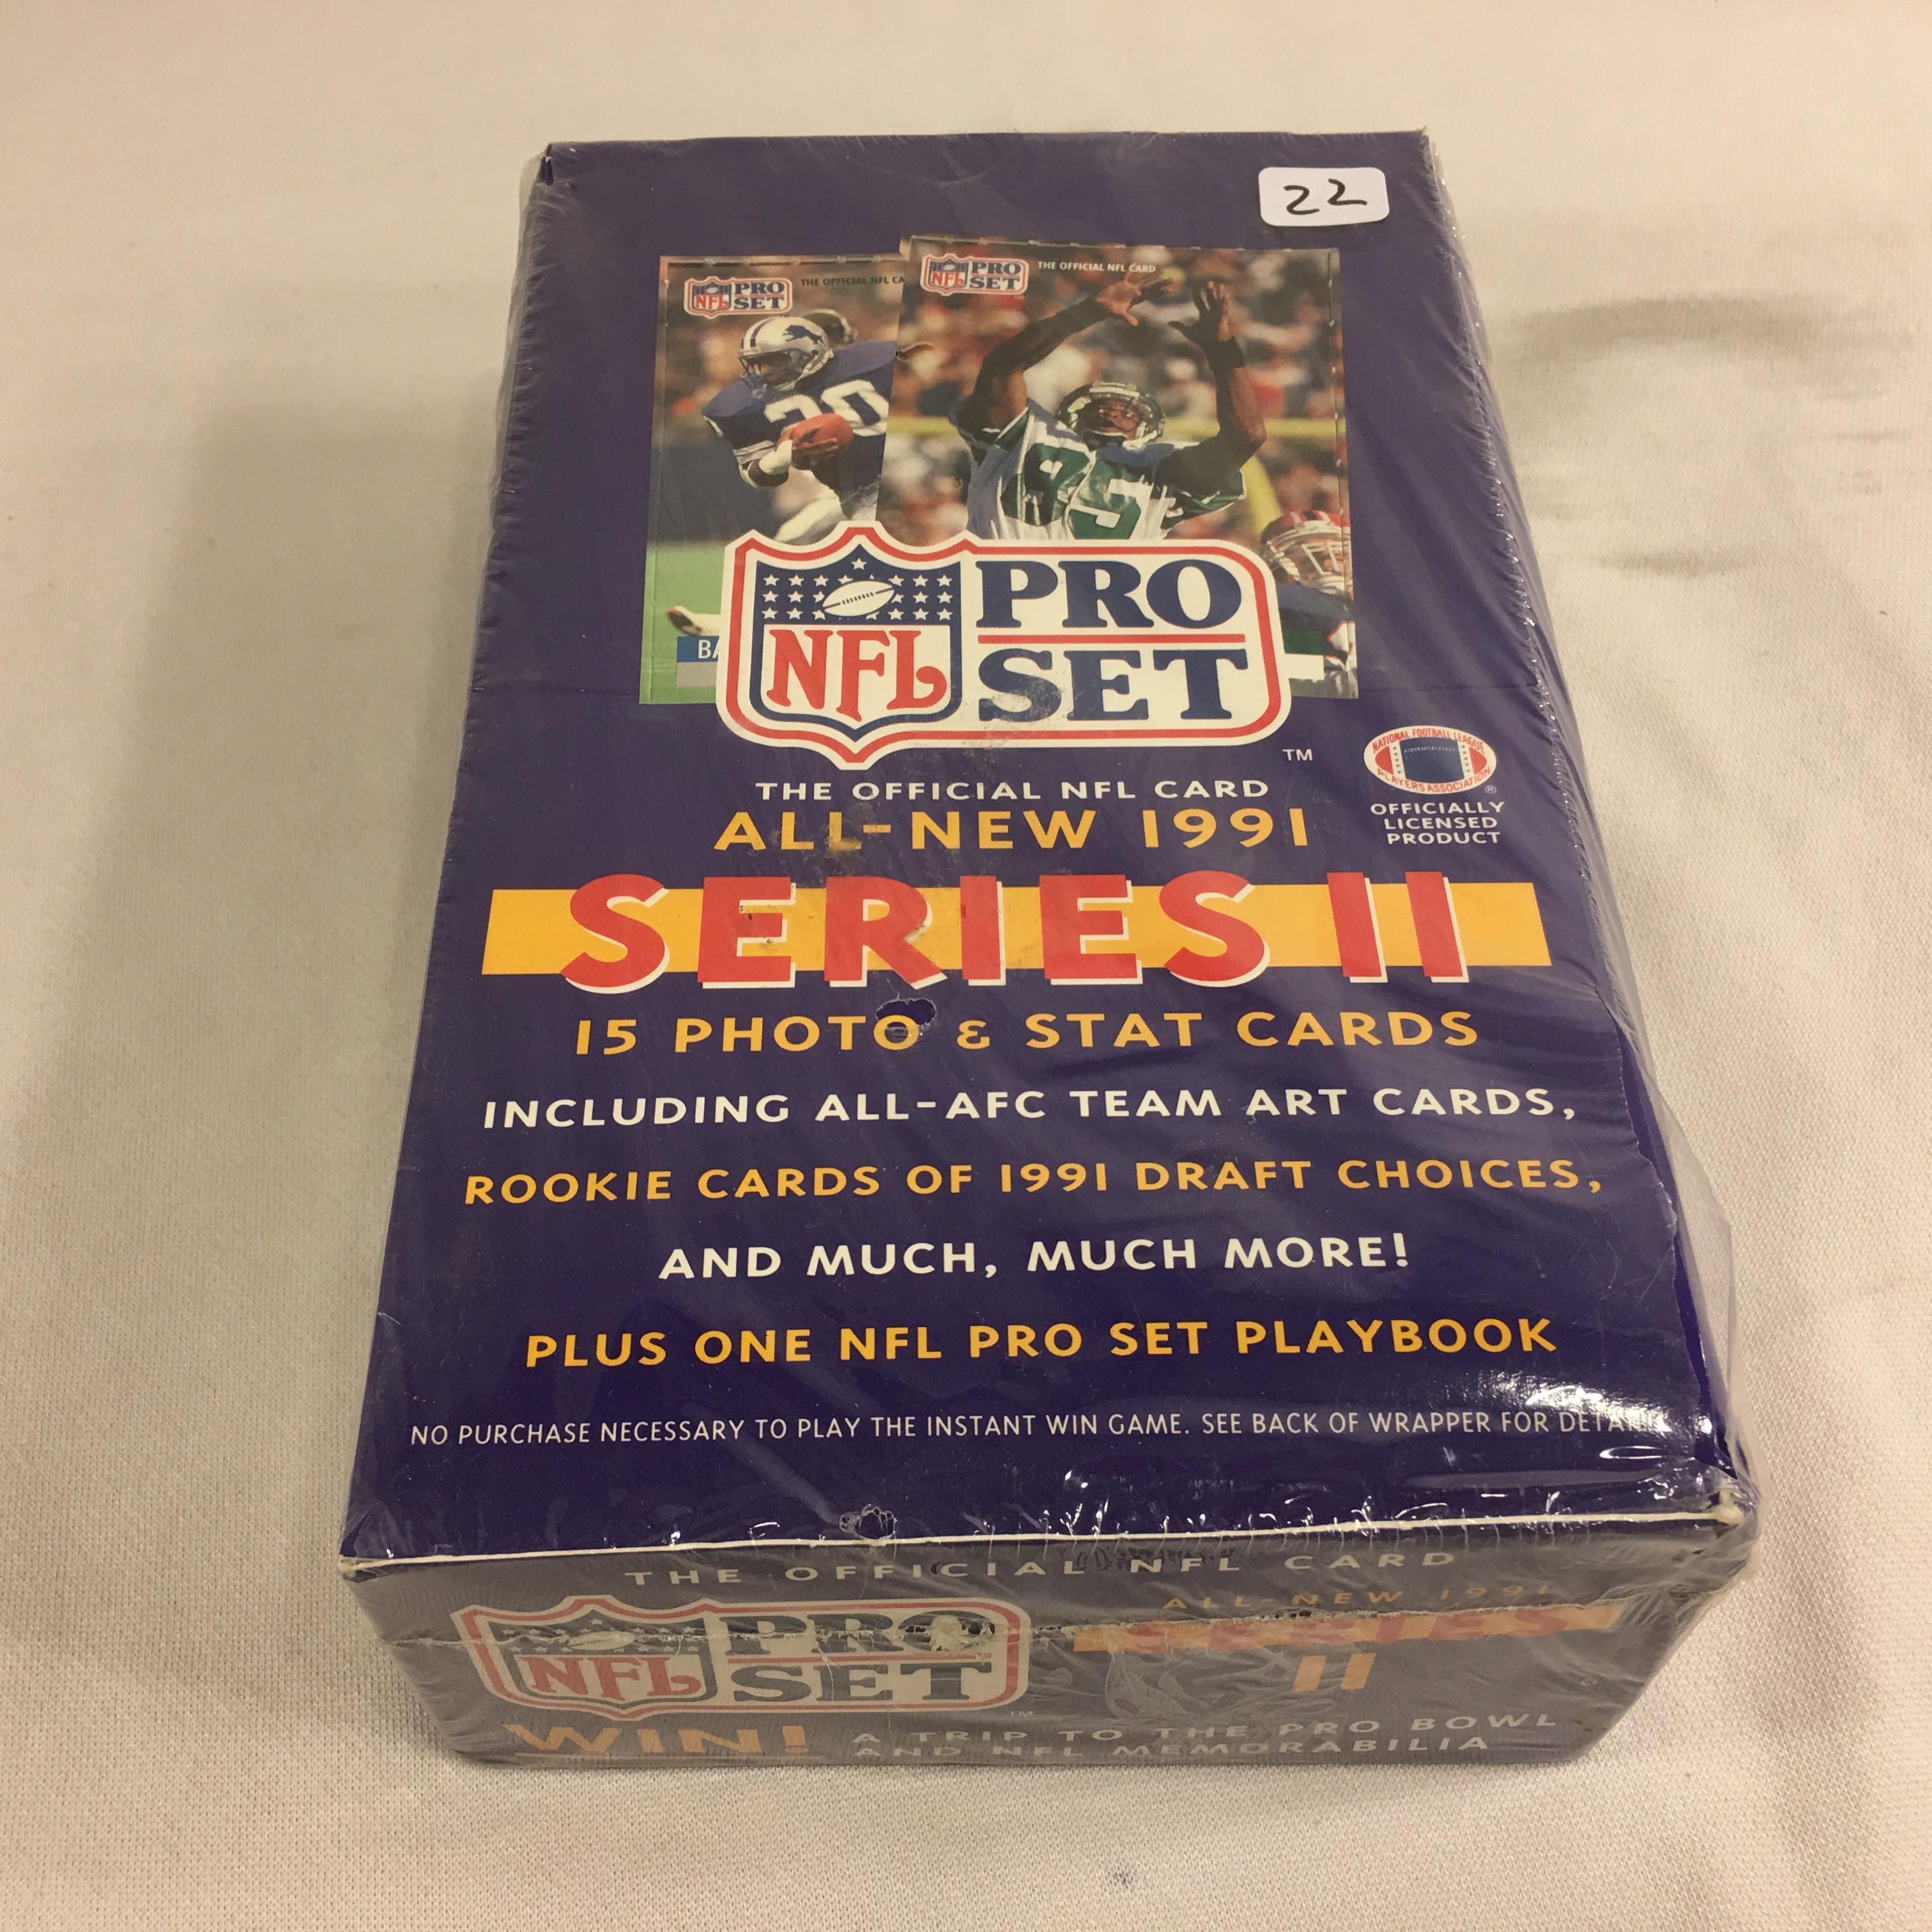 New Sealed in Box - Collector Pro NFL Set All-New 1991 Series II Football Sport Trading Cards